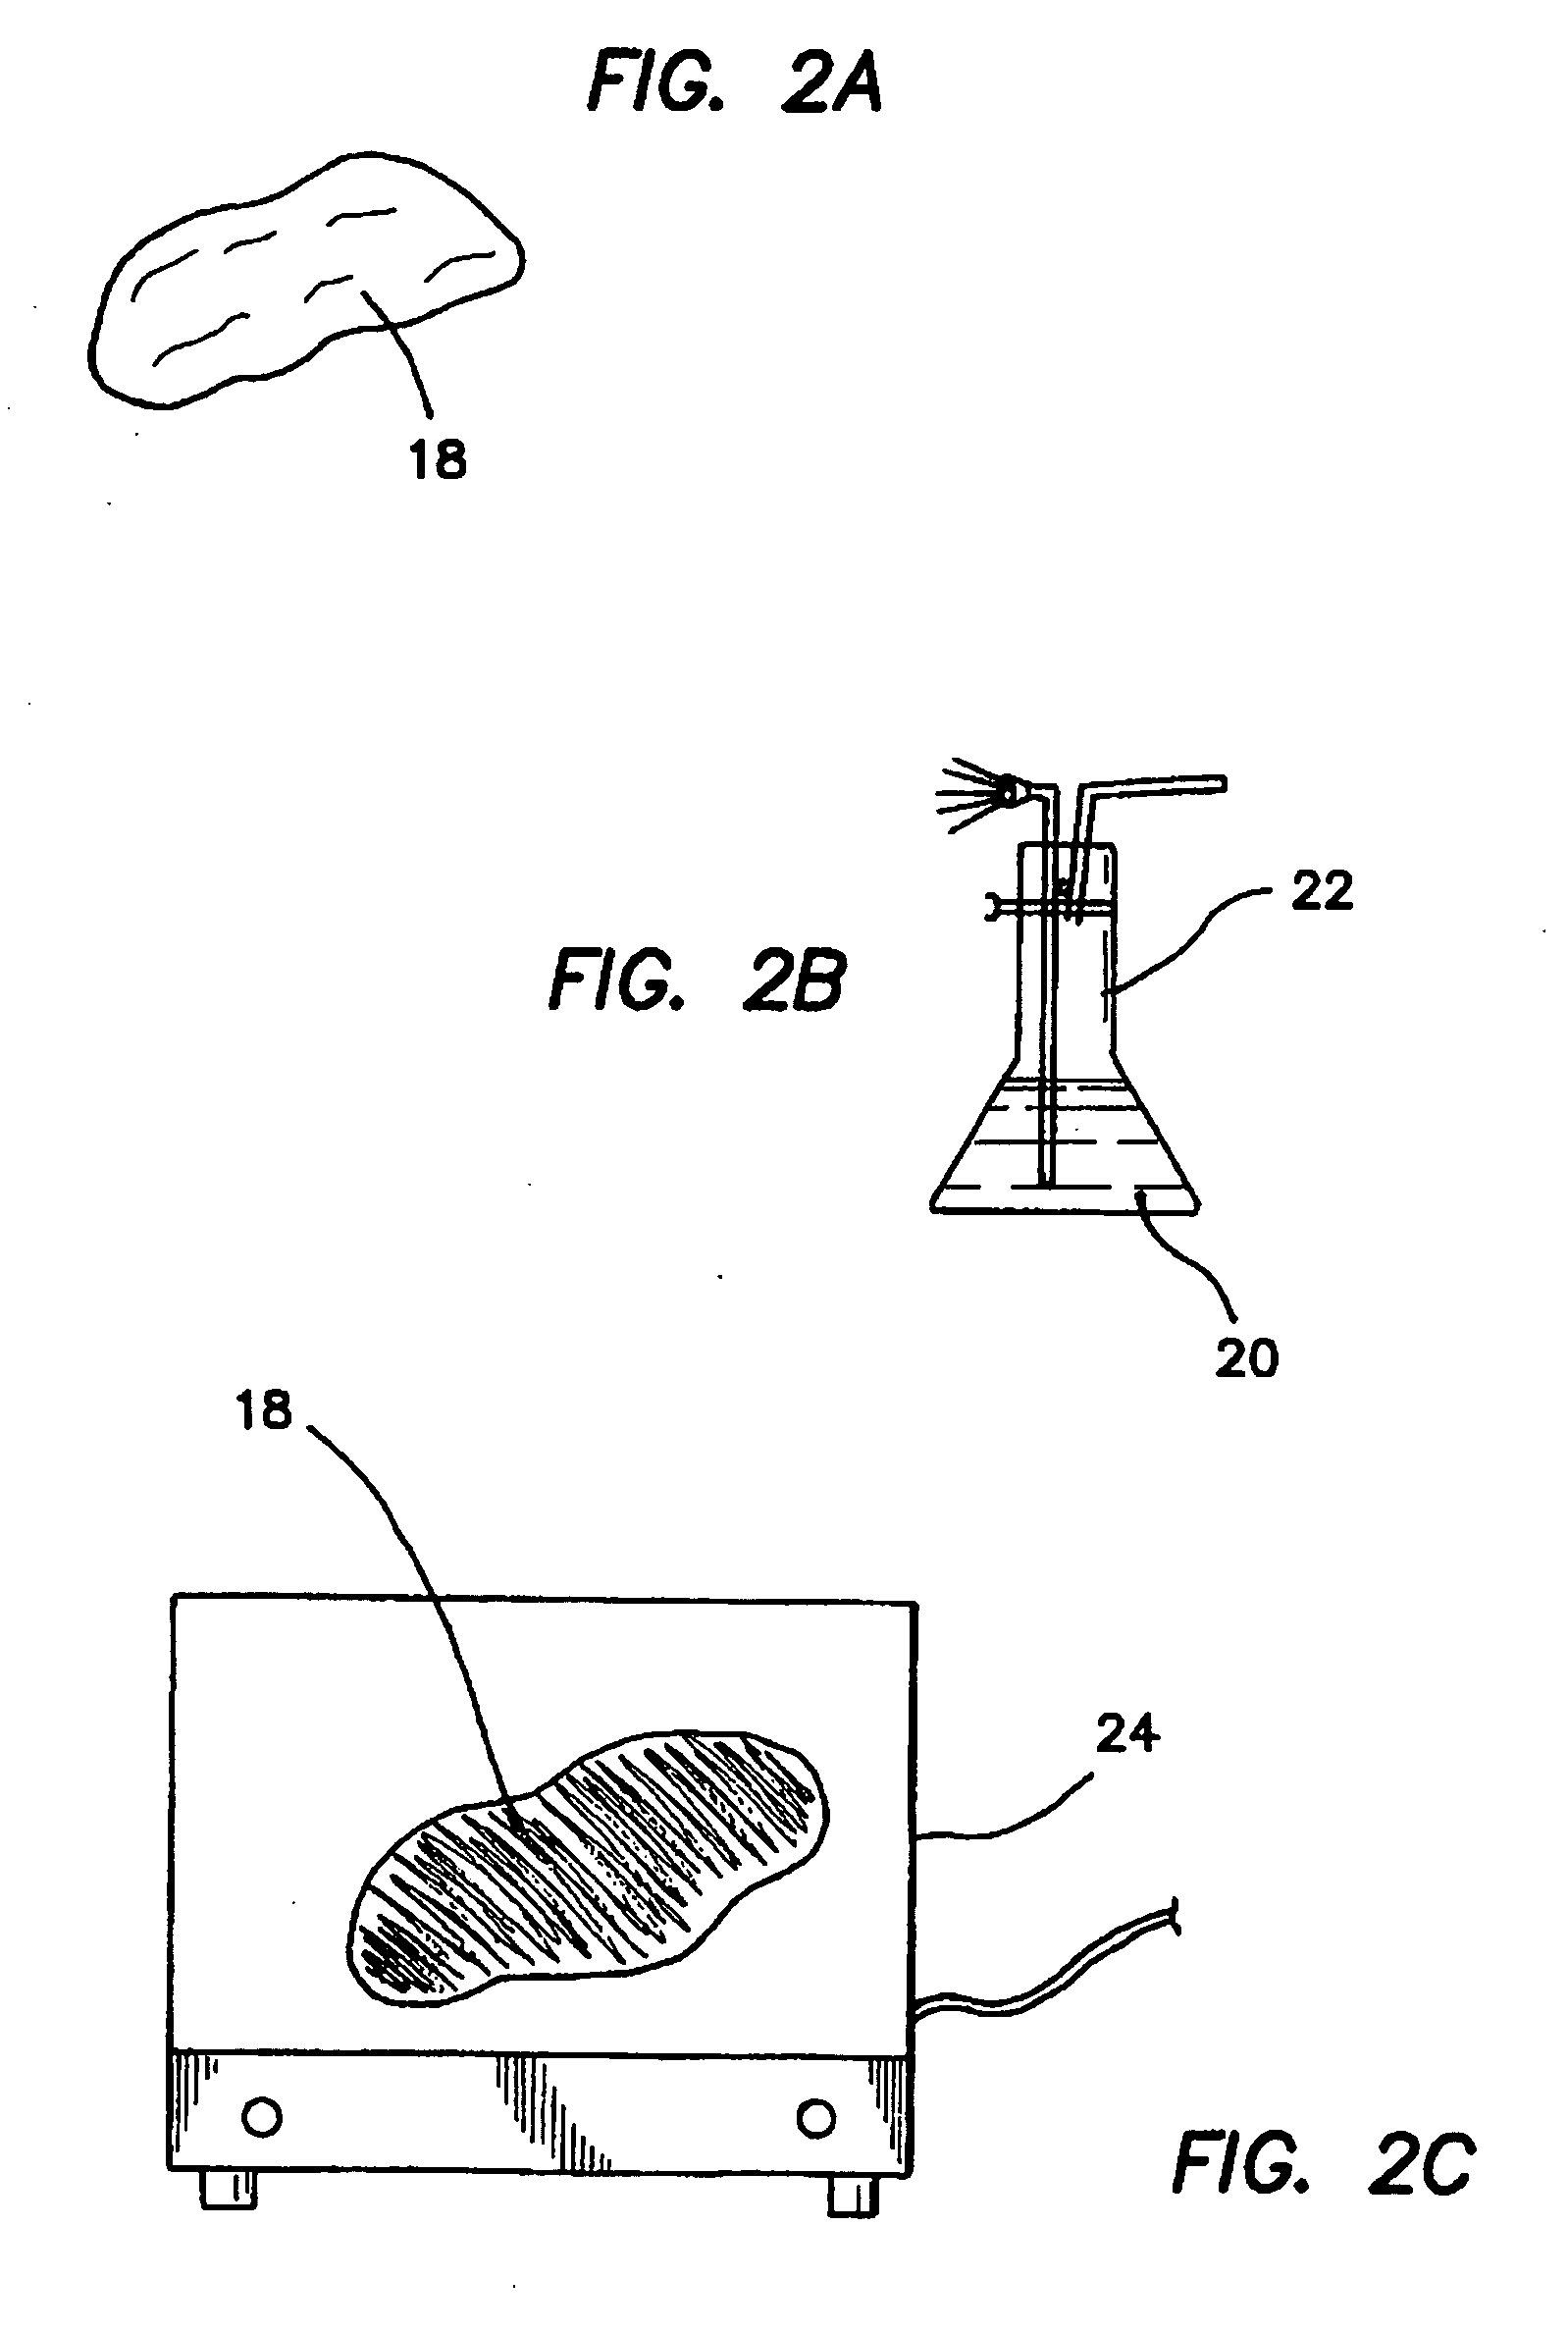 Apparatus and method for preventing adhesions between an implant and surrounding tissues